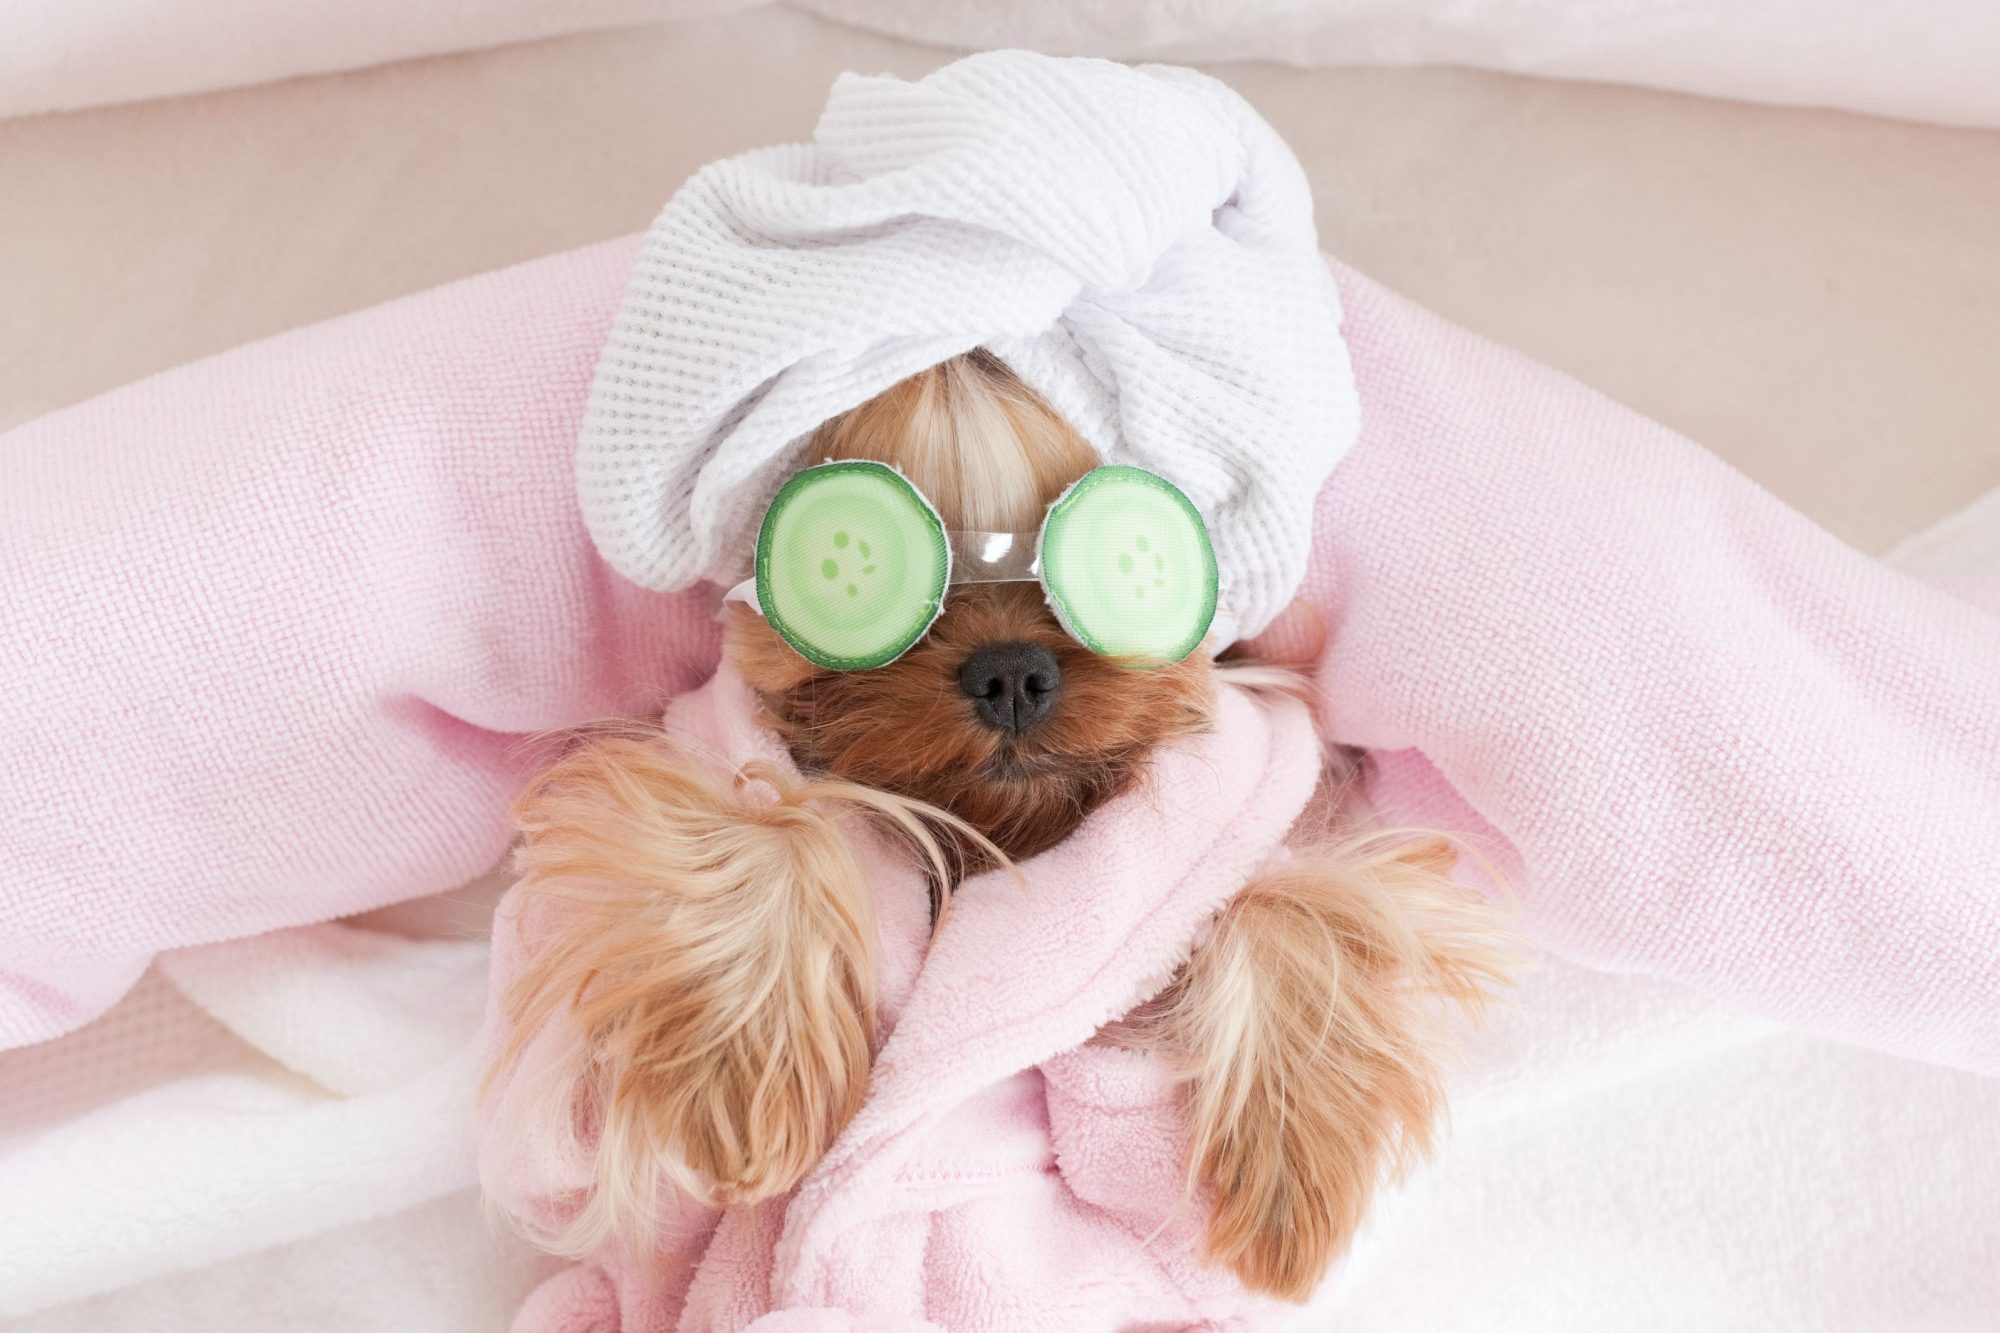 pampered pets